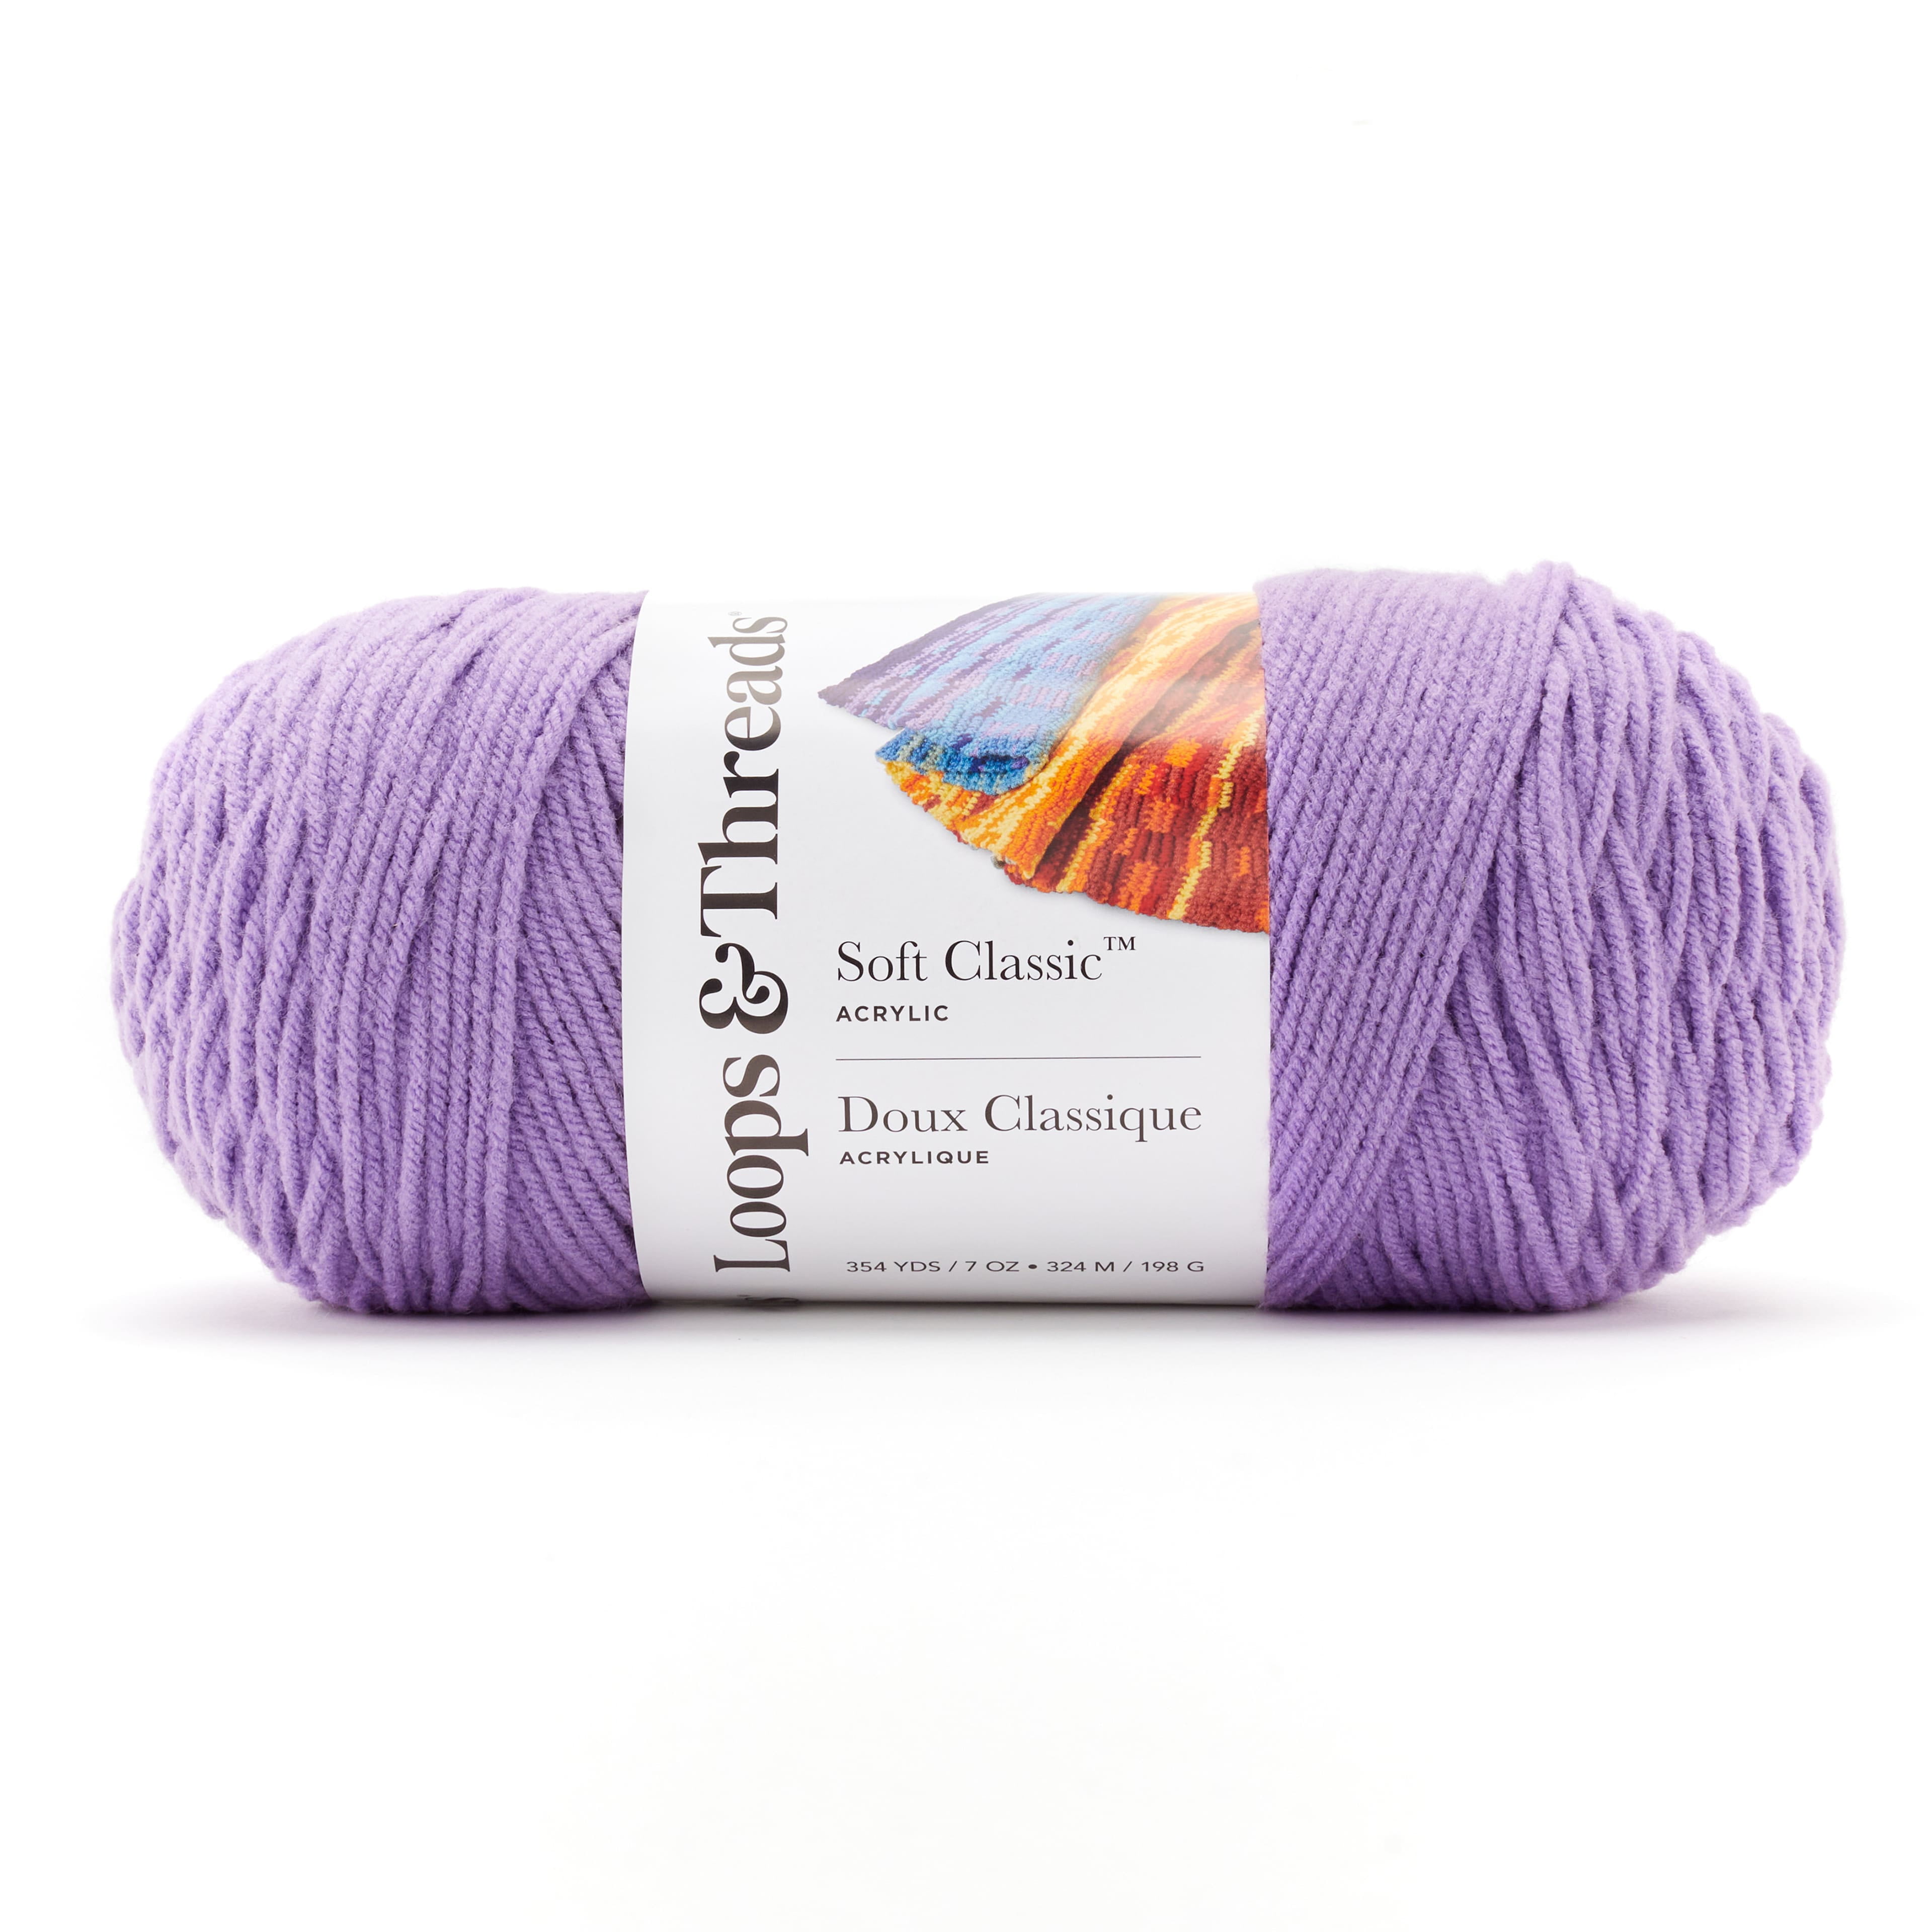 I finally found the new sweet snuggles lite blossom yarn at Michaels!!